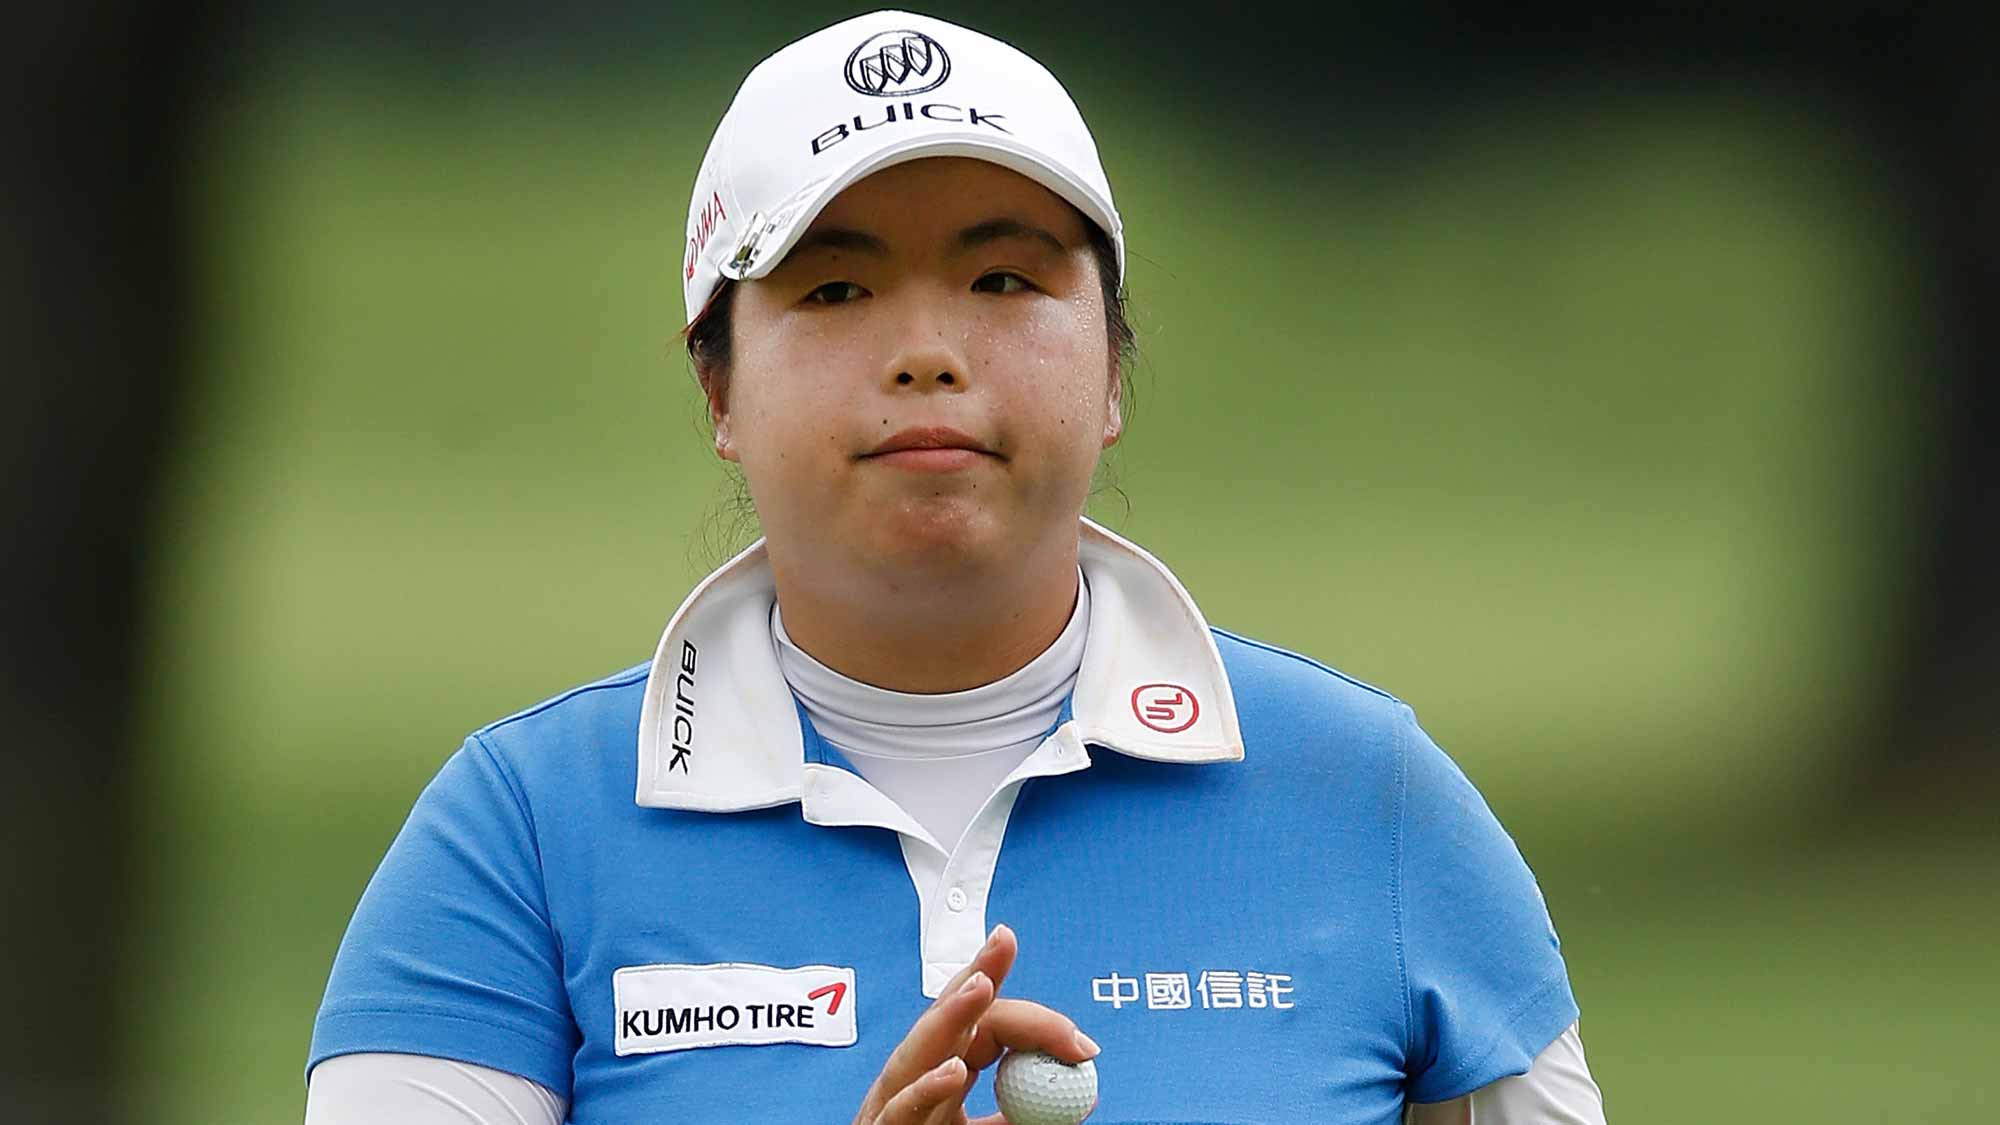 Shanshan Feng of China waves to fans after making a birdie putt on the 17th green during the second round of the Marathon Classic presented by Owens Corning and O-I at Highland Meadows Golf Club